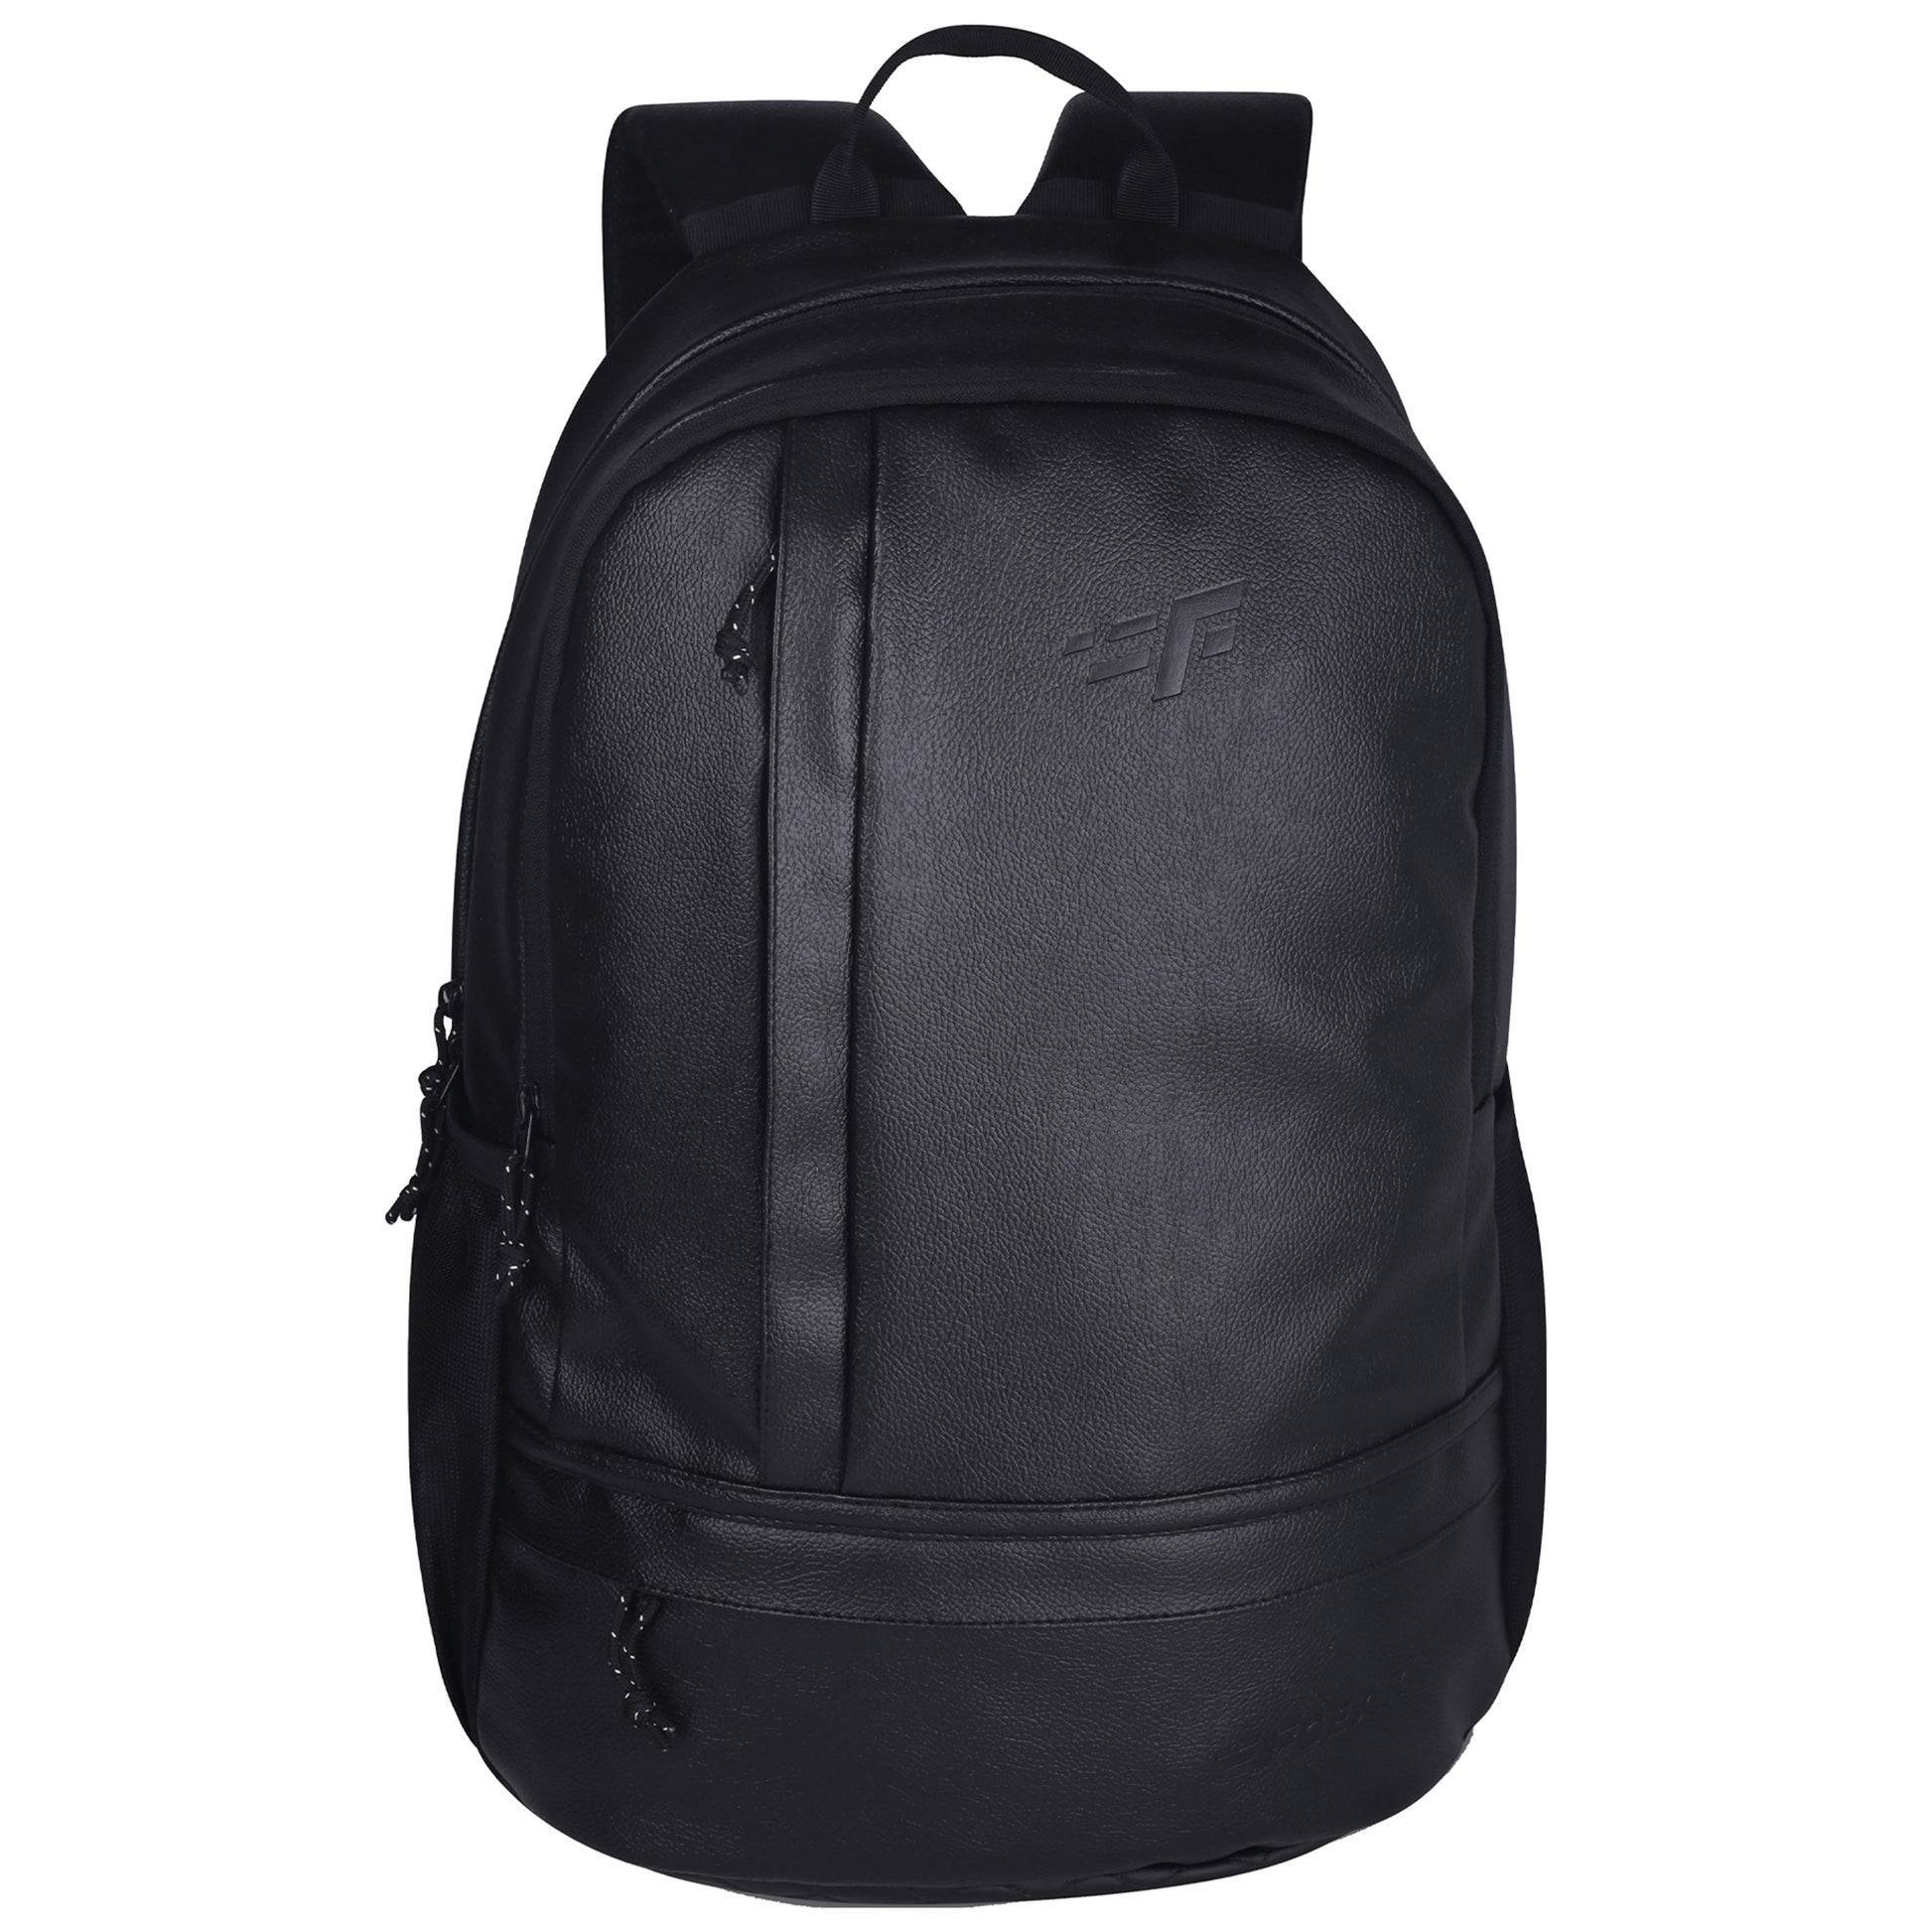 Bluechip 30L Black Laptop Backpack With Rain Cover